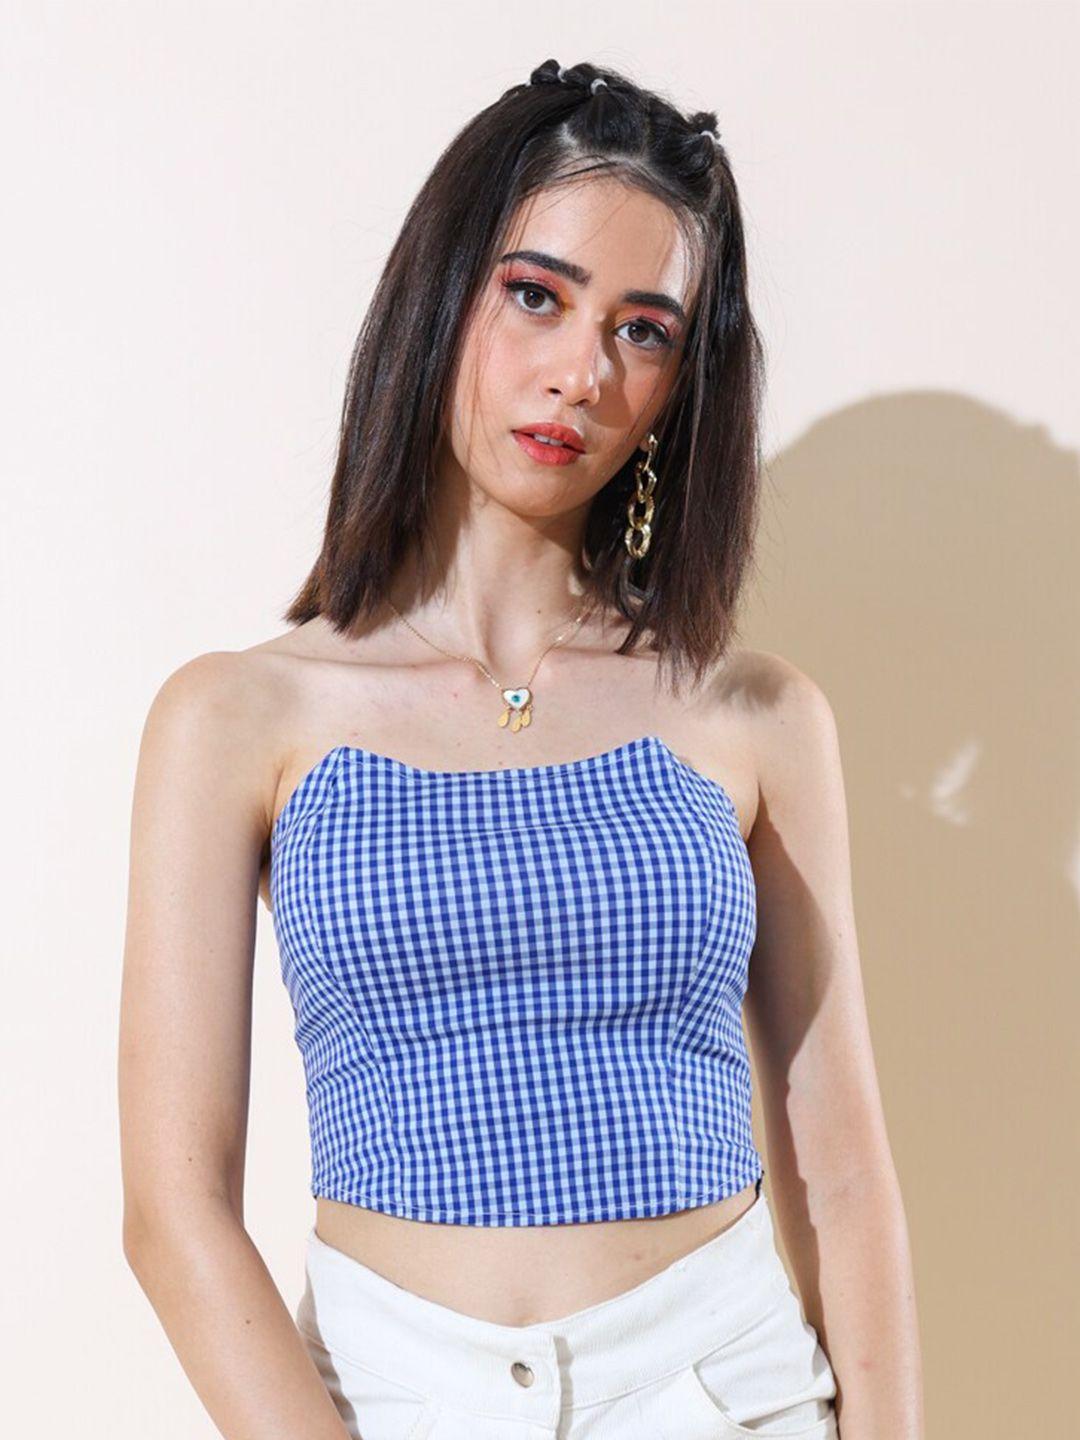 stylecast x hersheinbox multicoloured checked tube top